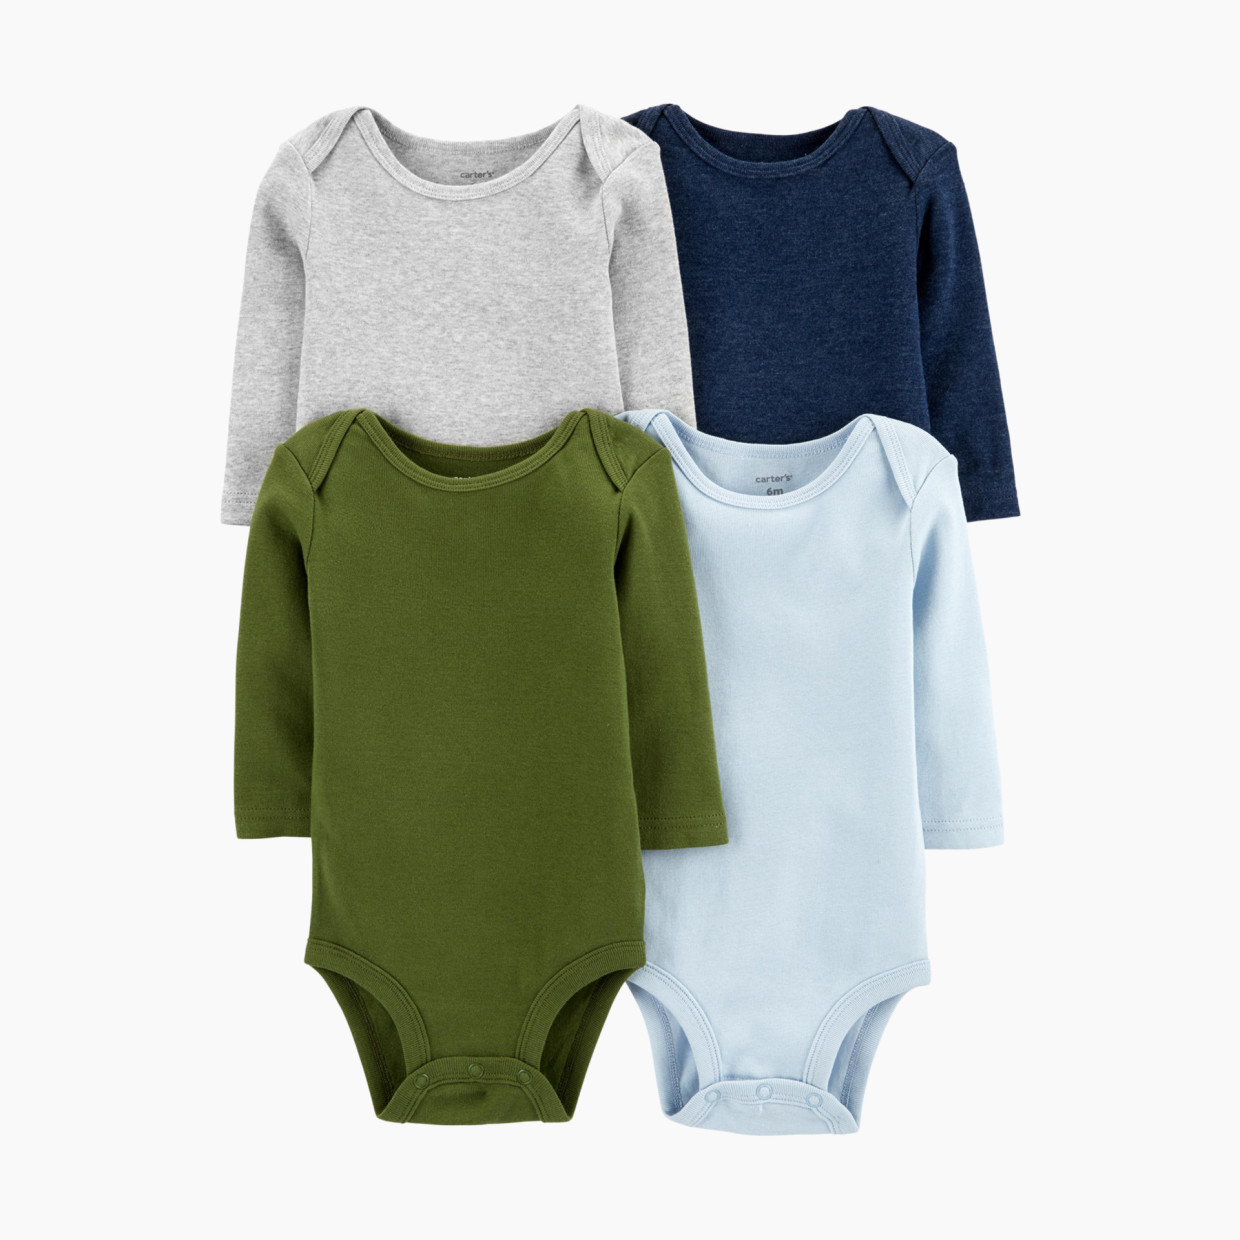 Carter's Long Sleeve Bodysuit (4 Pack) - Multi (Heathered Navy Solids), 0-3 Months.